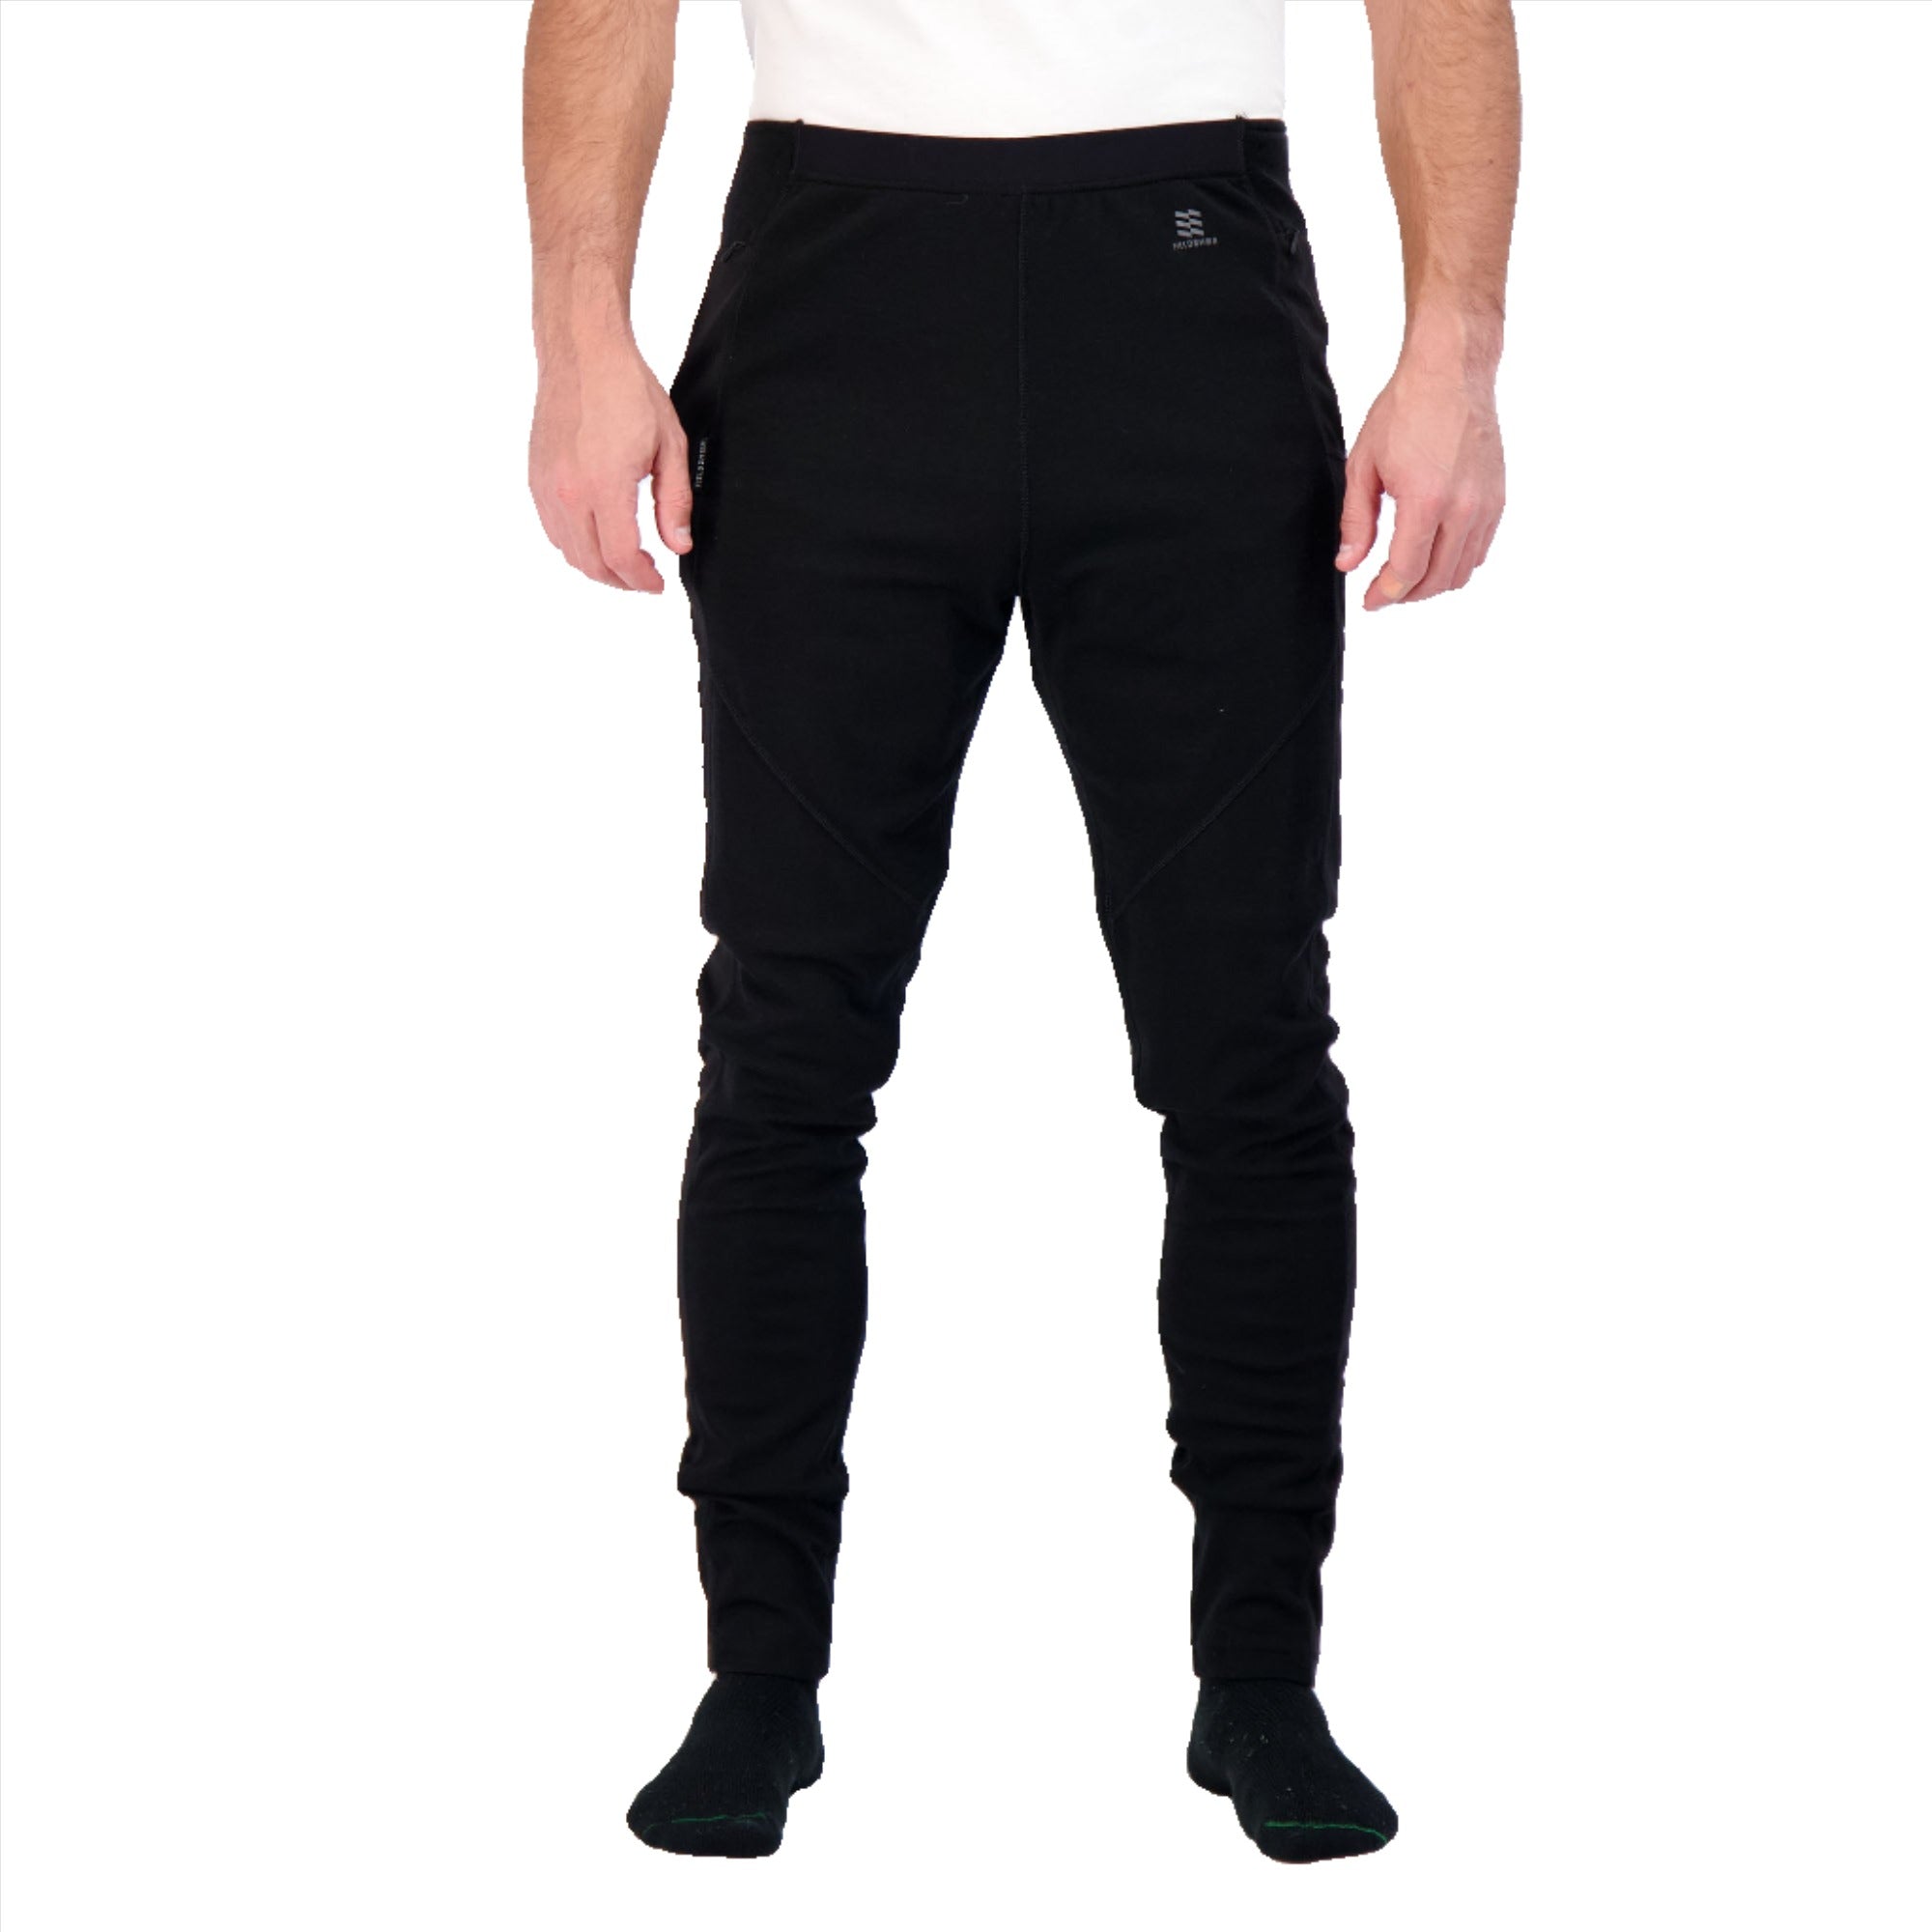  Fieldsheer Mobile Warming Men's Primer Heated Base Layer Pants  : Clothing, Shoes & Jewelry